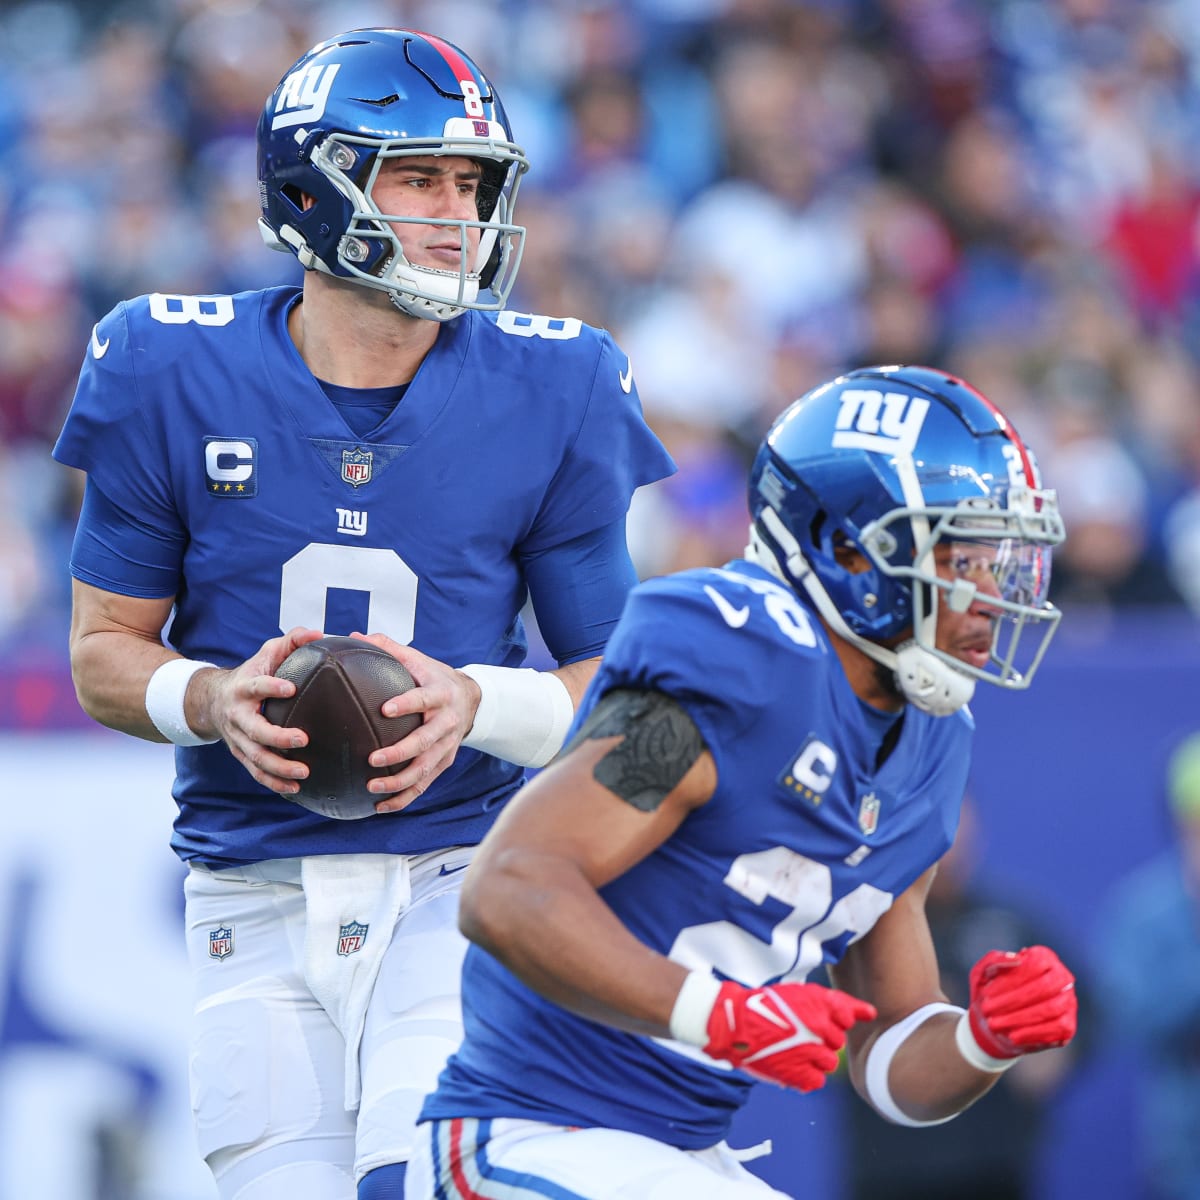 Best Bets for the Cowboys vs. Giants Sunday Night Football Game